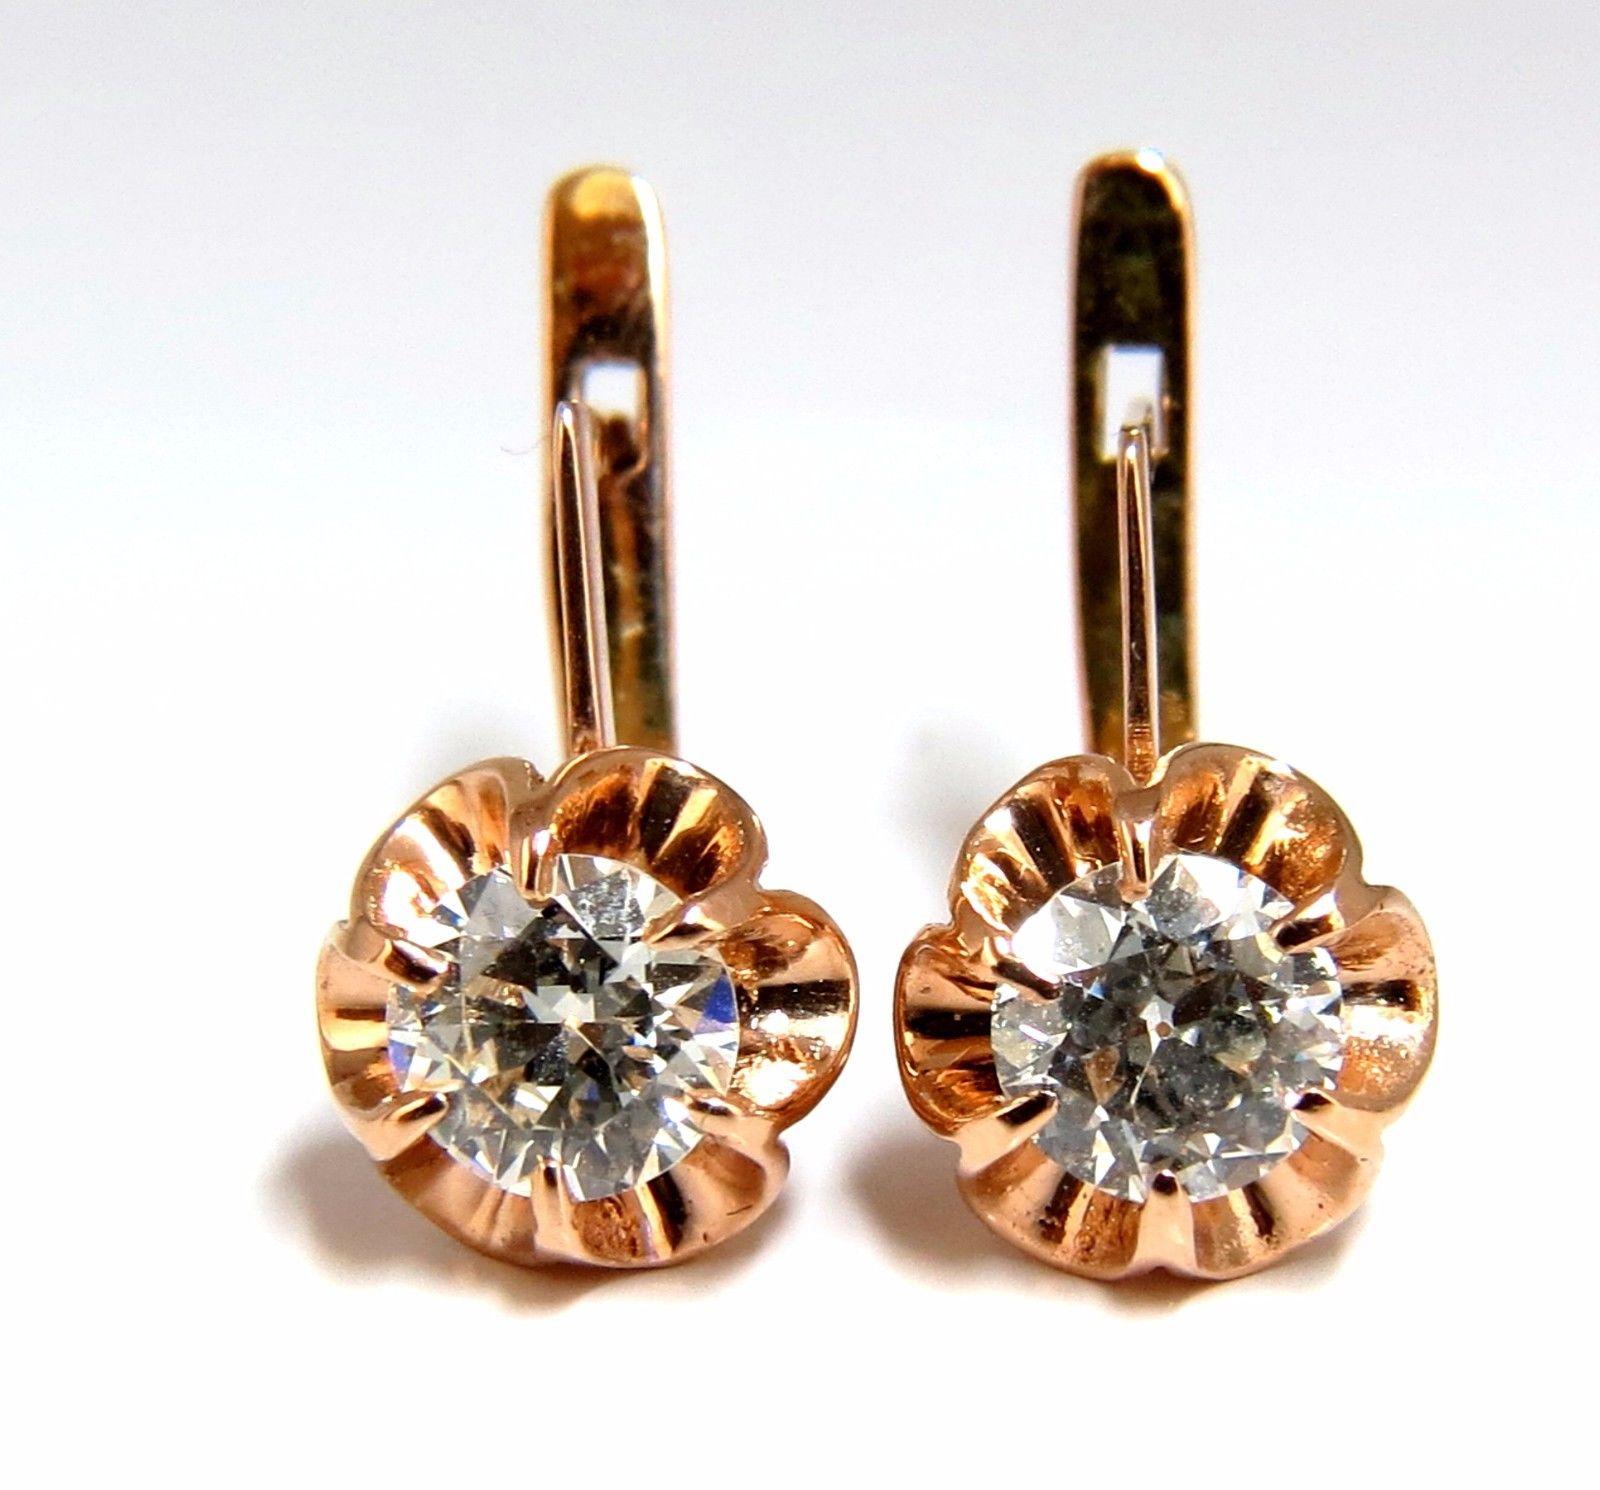 Victorian Stud & Lever Clip

1.40ct. Round, Old mine cut diamond earrings 

H-color

Vs-2 clarity.

Each diamond: 5.8mm

4.4 grams.

Natural, No Enhancements.

14kt rose gold

$8000 Appraisal Certificate to accompany